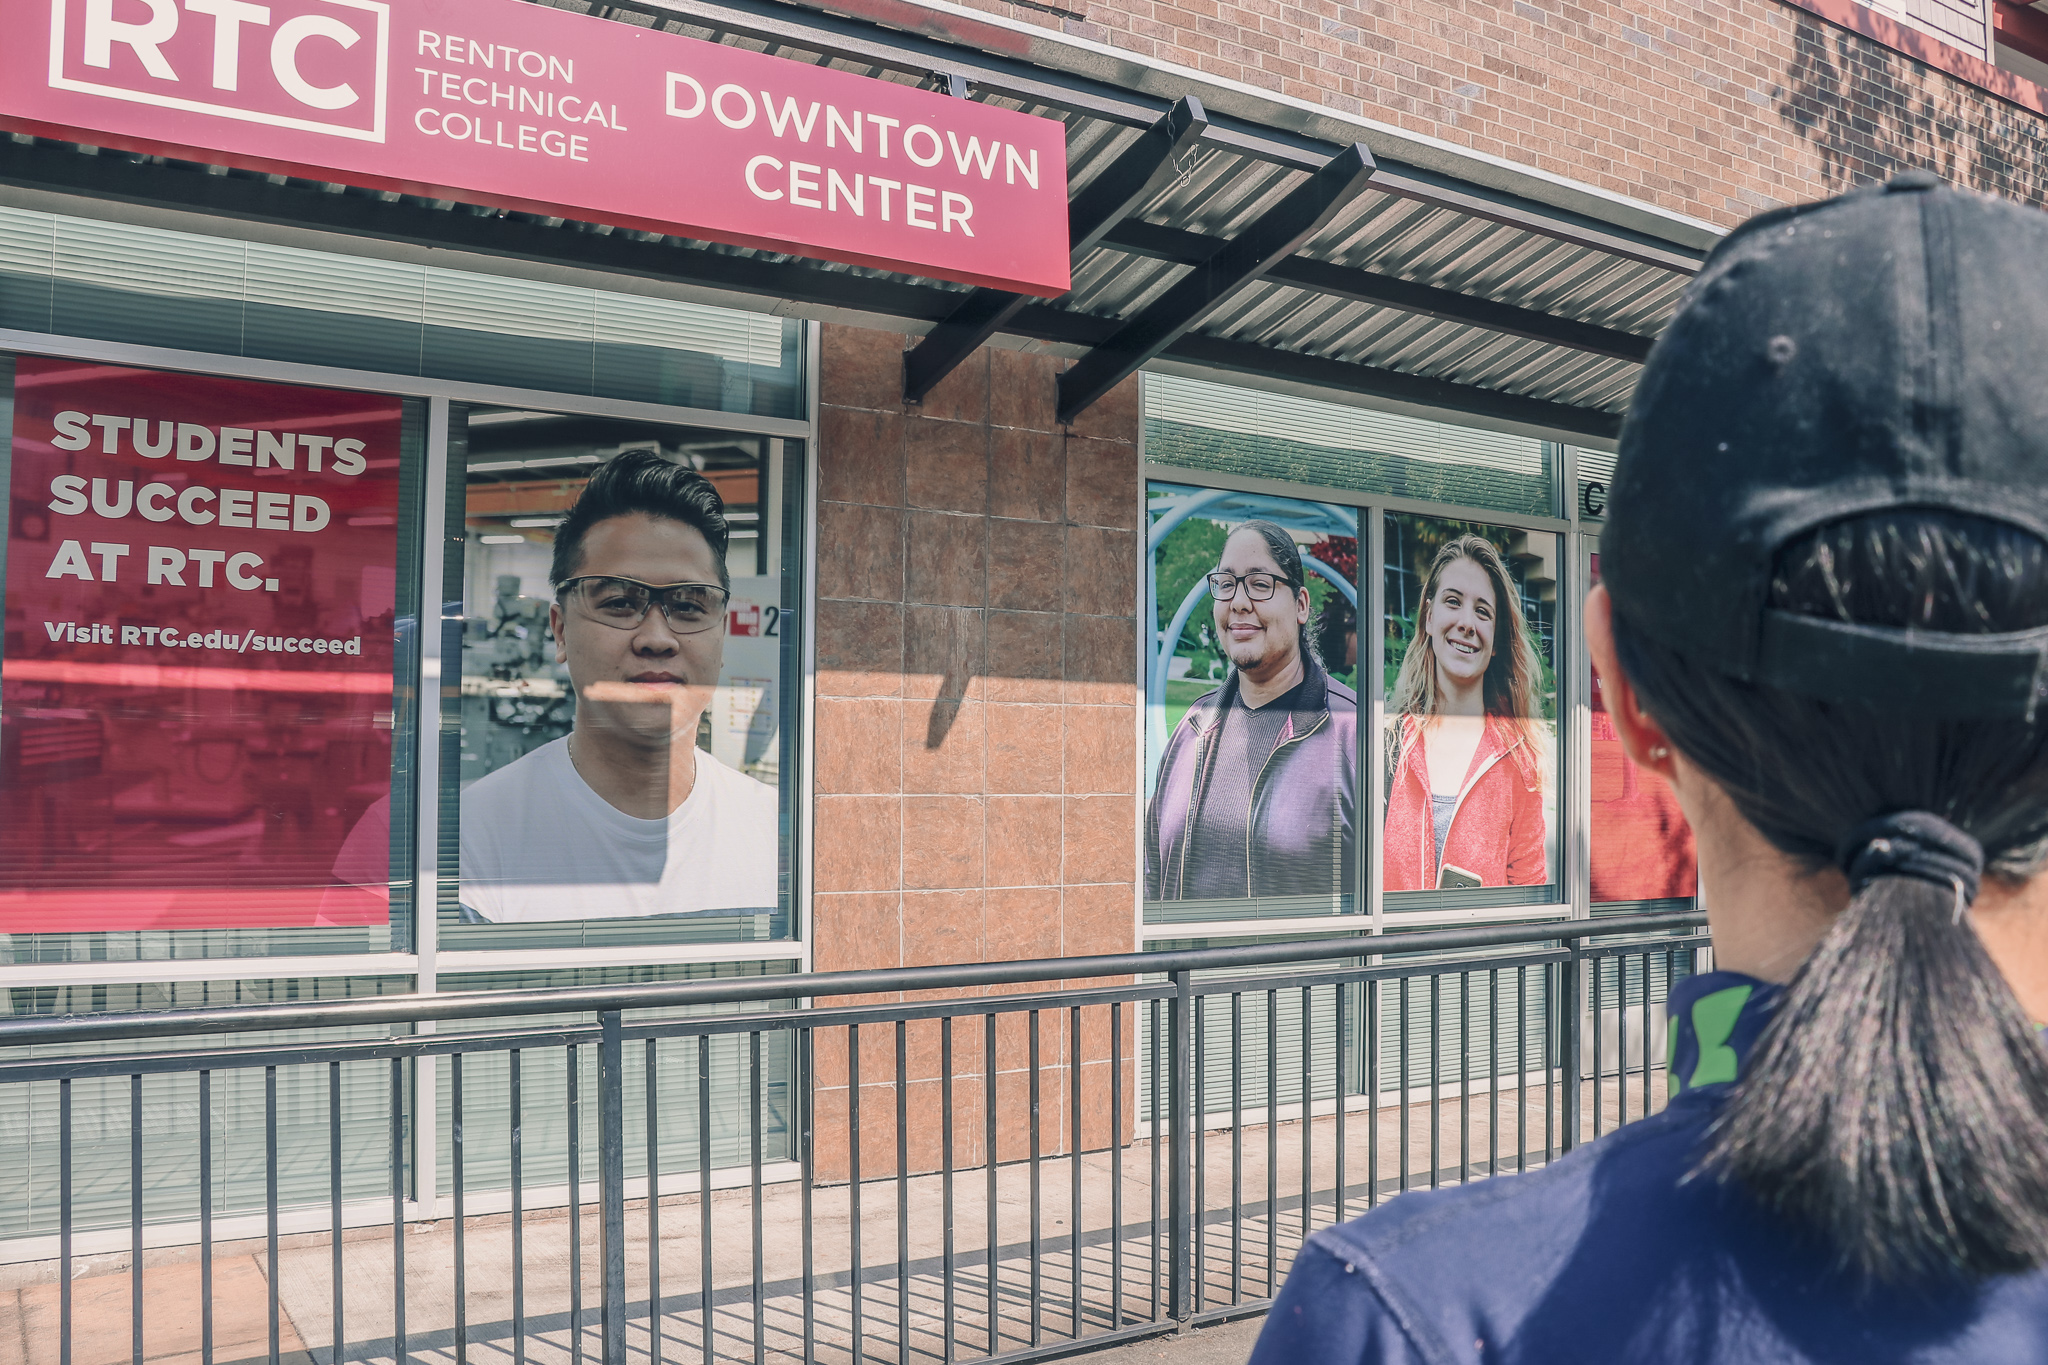 Passerby looks out to RTC Downtown Center Burnett Avenue facade with the newly developed displays featuring RTC student and message "Students Succeed at RTC."